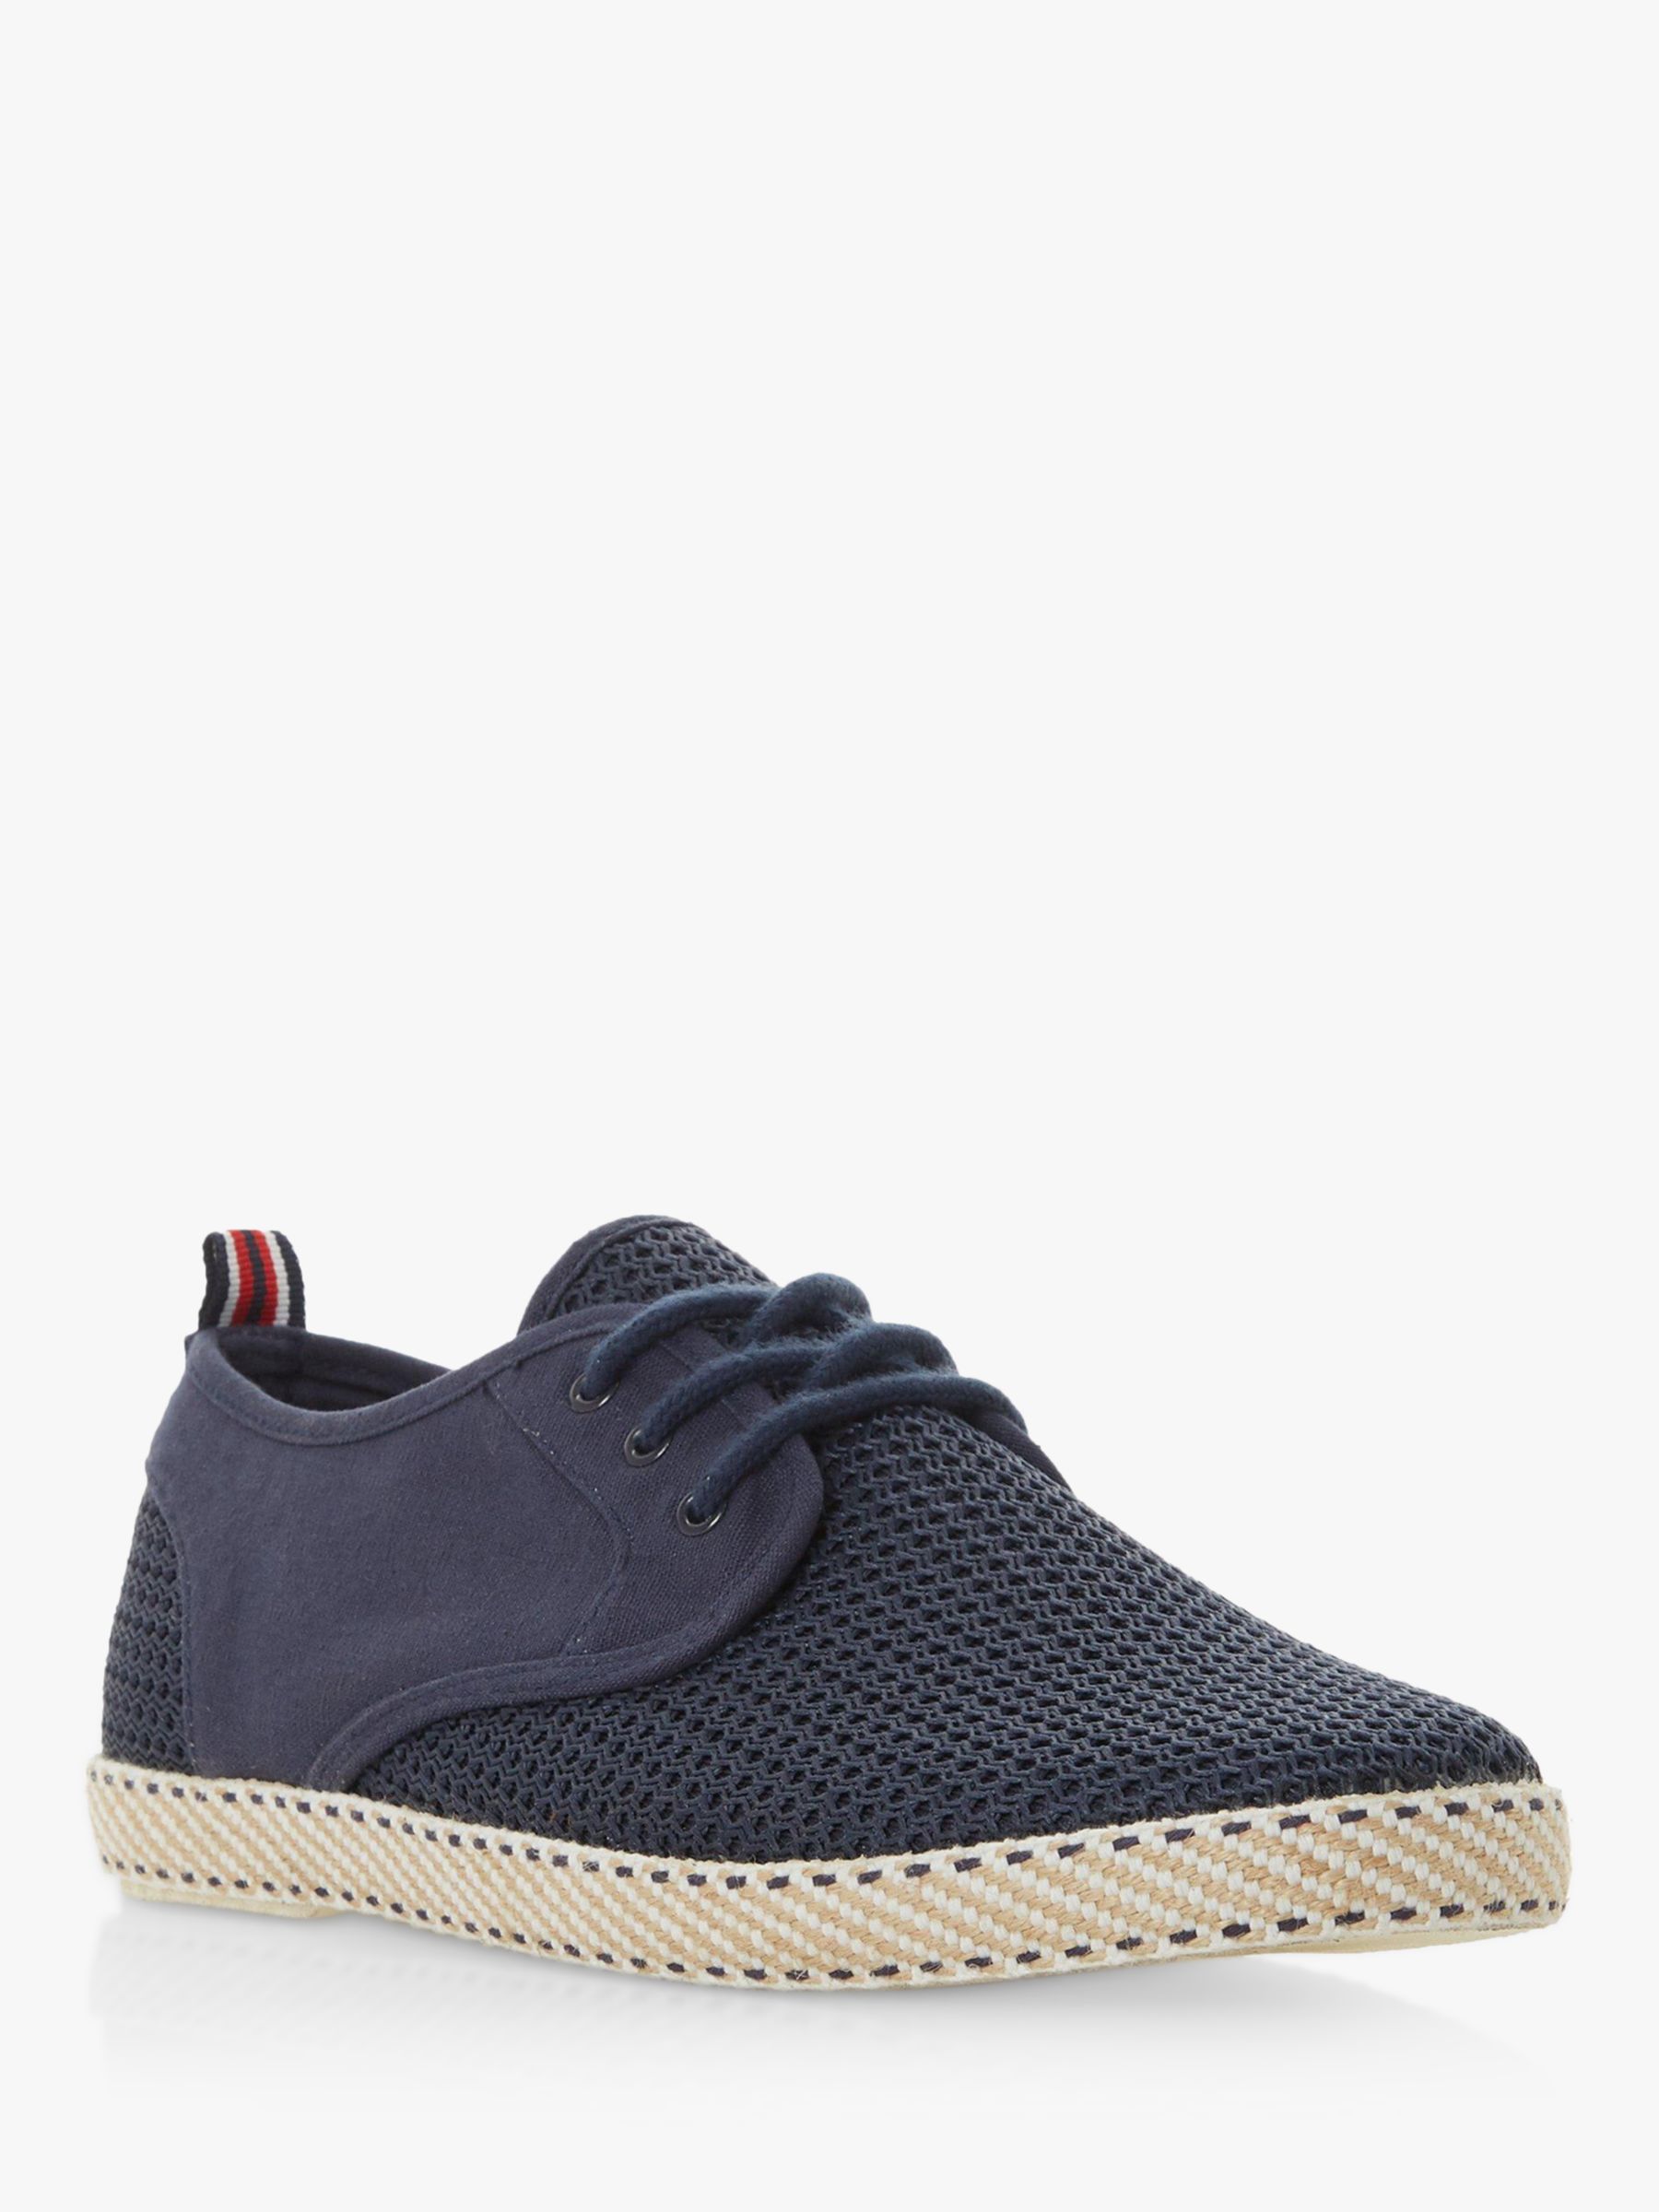 Dune Flash Canvas Casual Shoes, Navy, 7